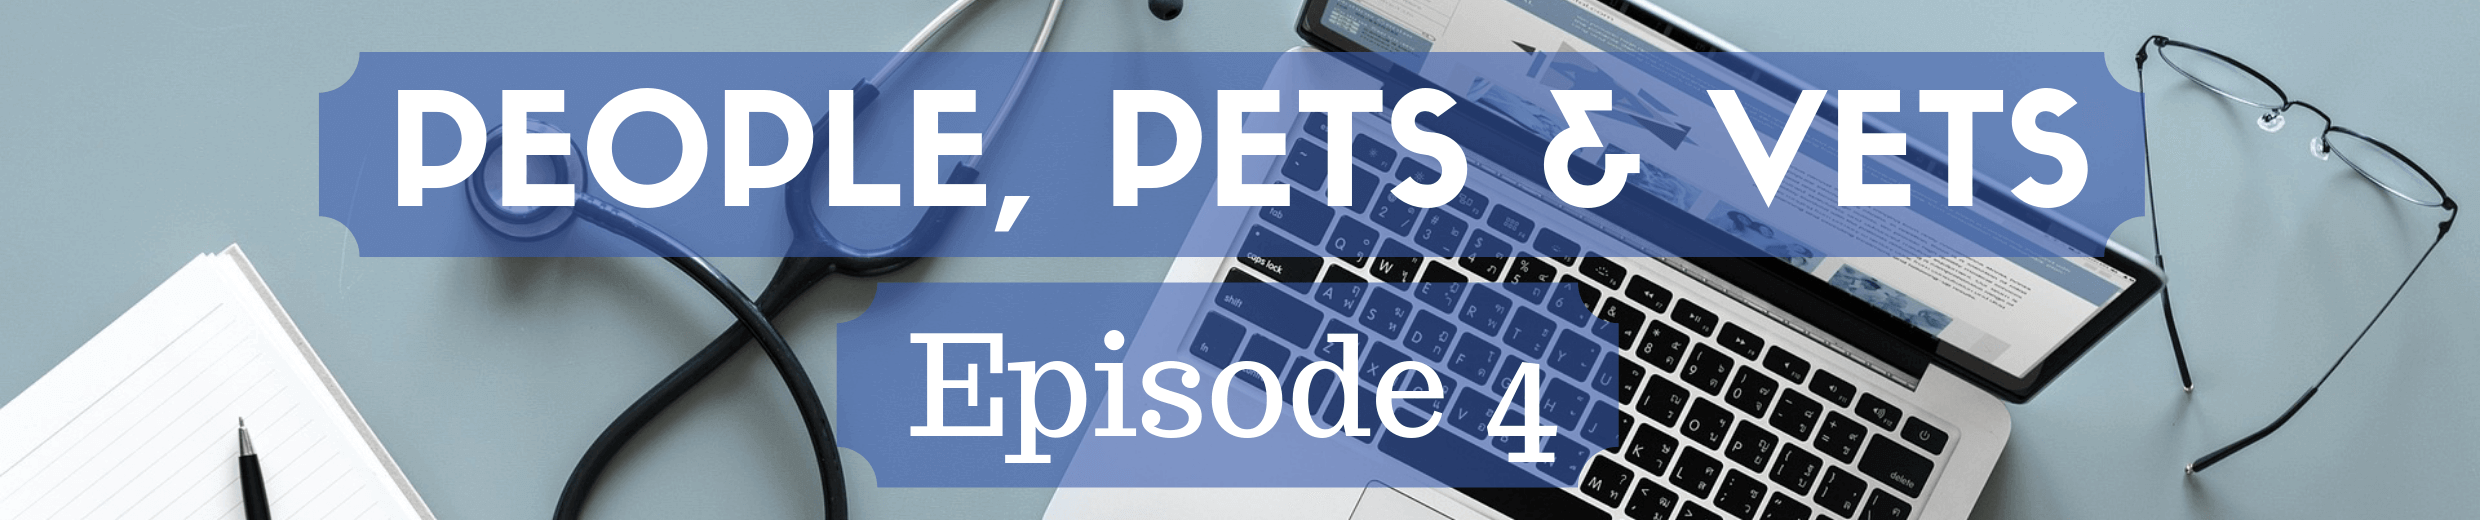 People, Pets and Vets: Episode 4